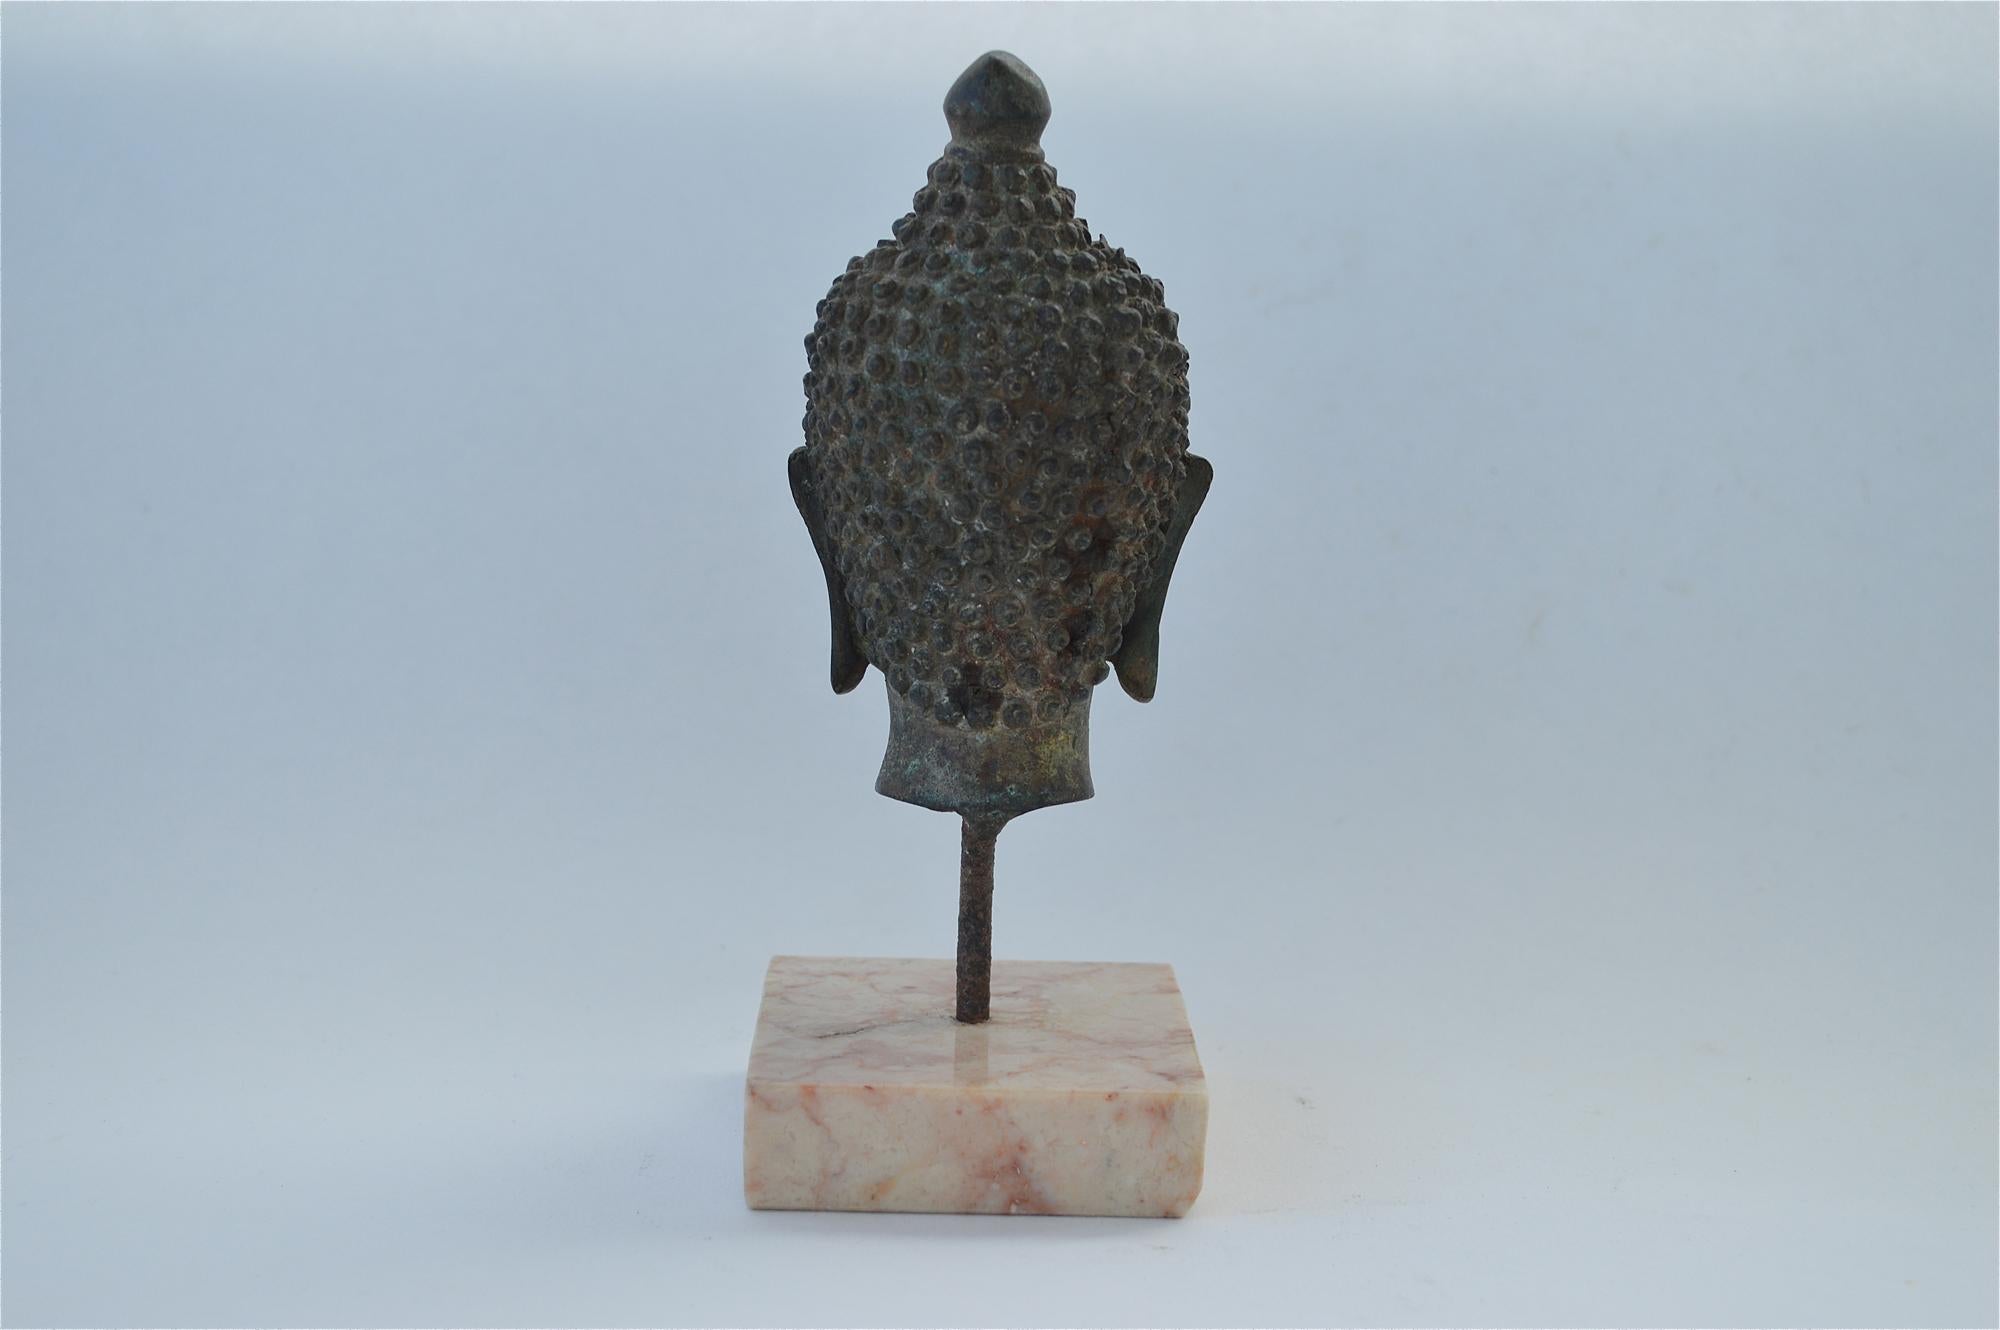 Indian Bronze Sculpture of the Head of Buddha